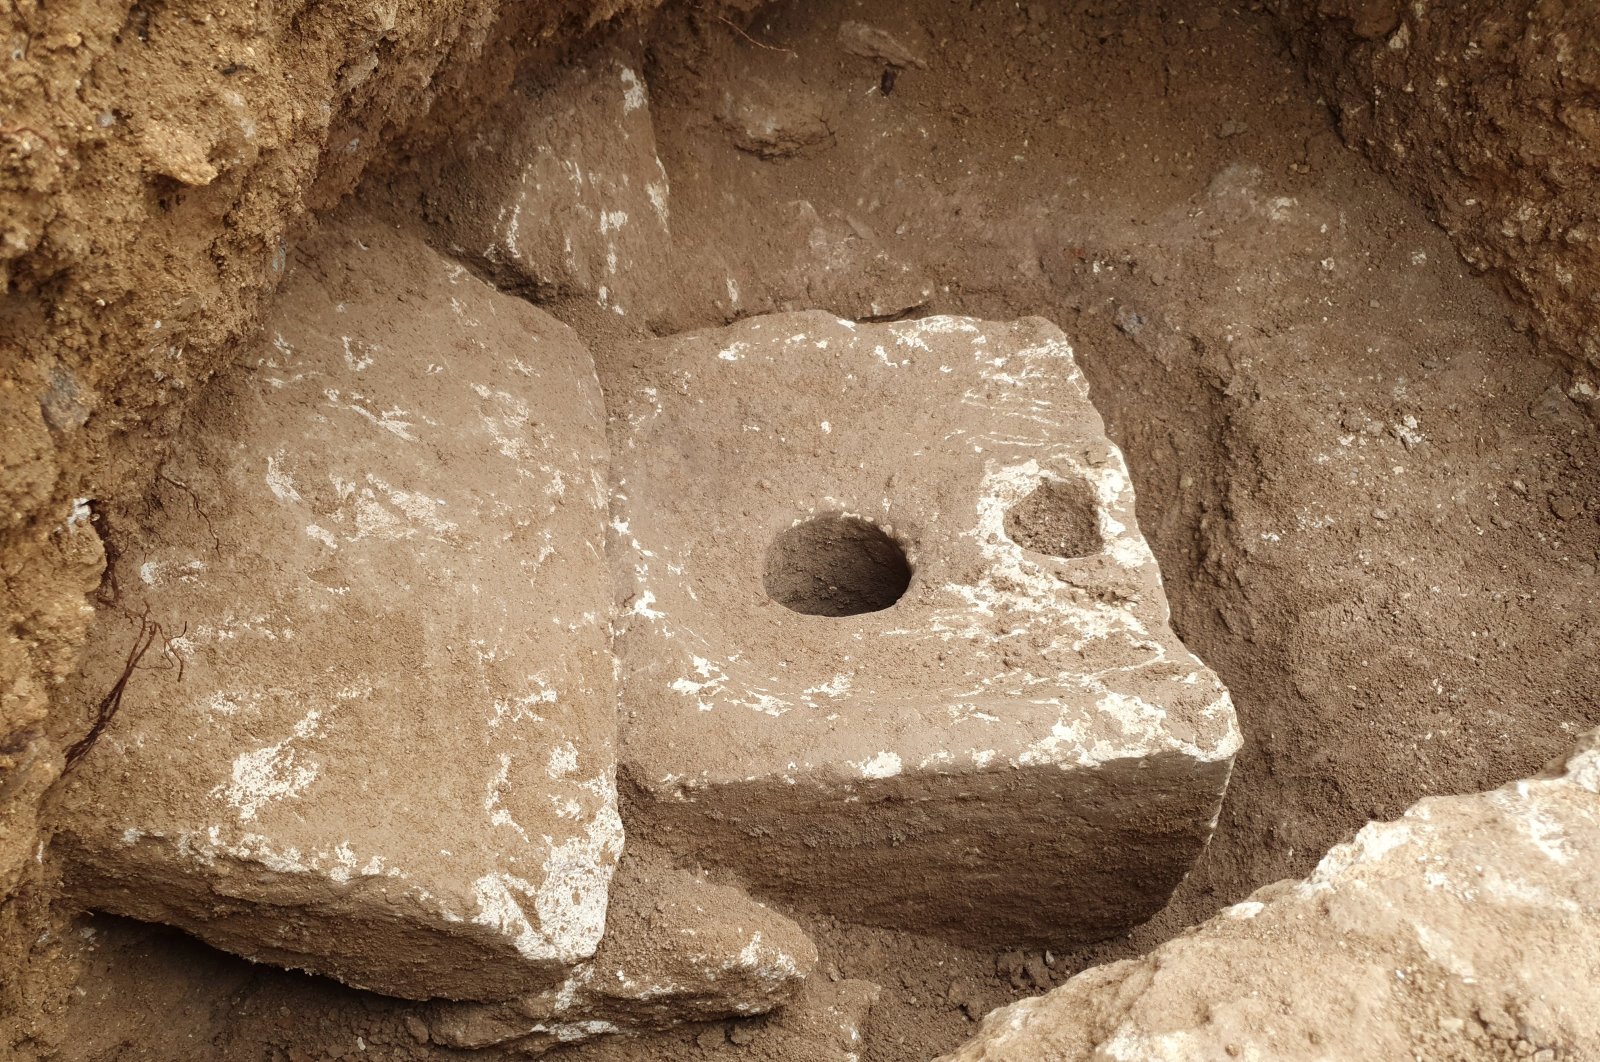 A rare ancient toilet dating back more than 2,700 years, when private bathrooms were a luxury, West Jerusalem, Israel, Oct. 5, 2021. (Israel Antiquities Authority via AP)